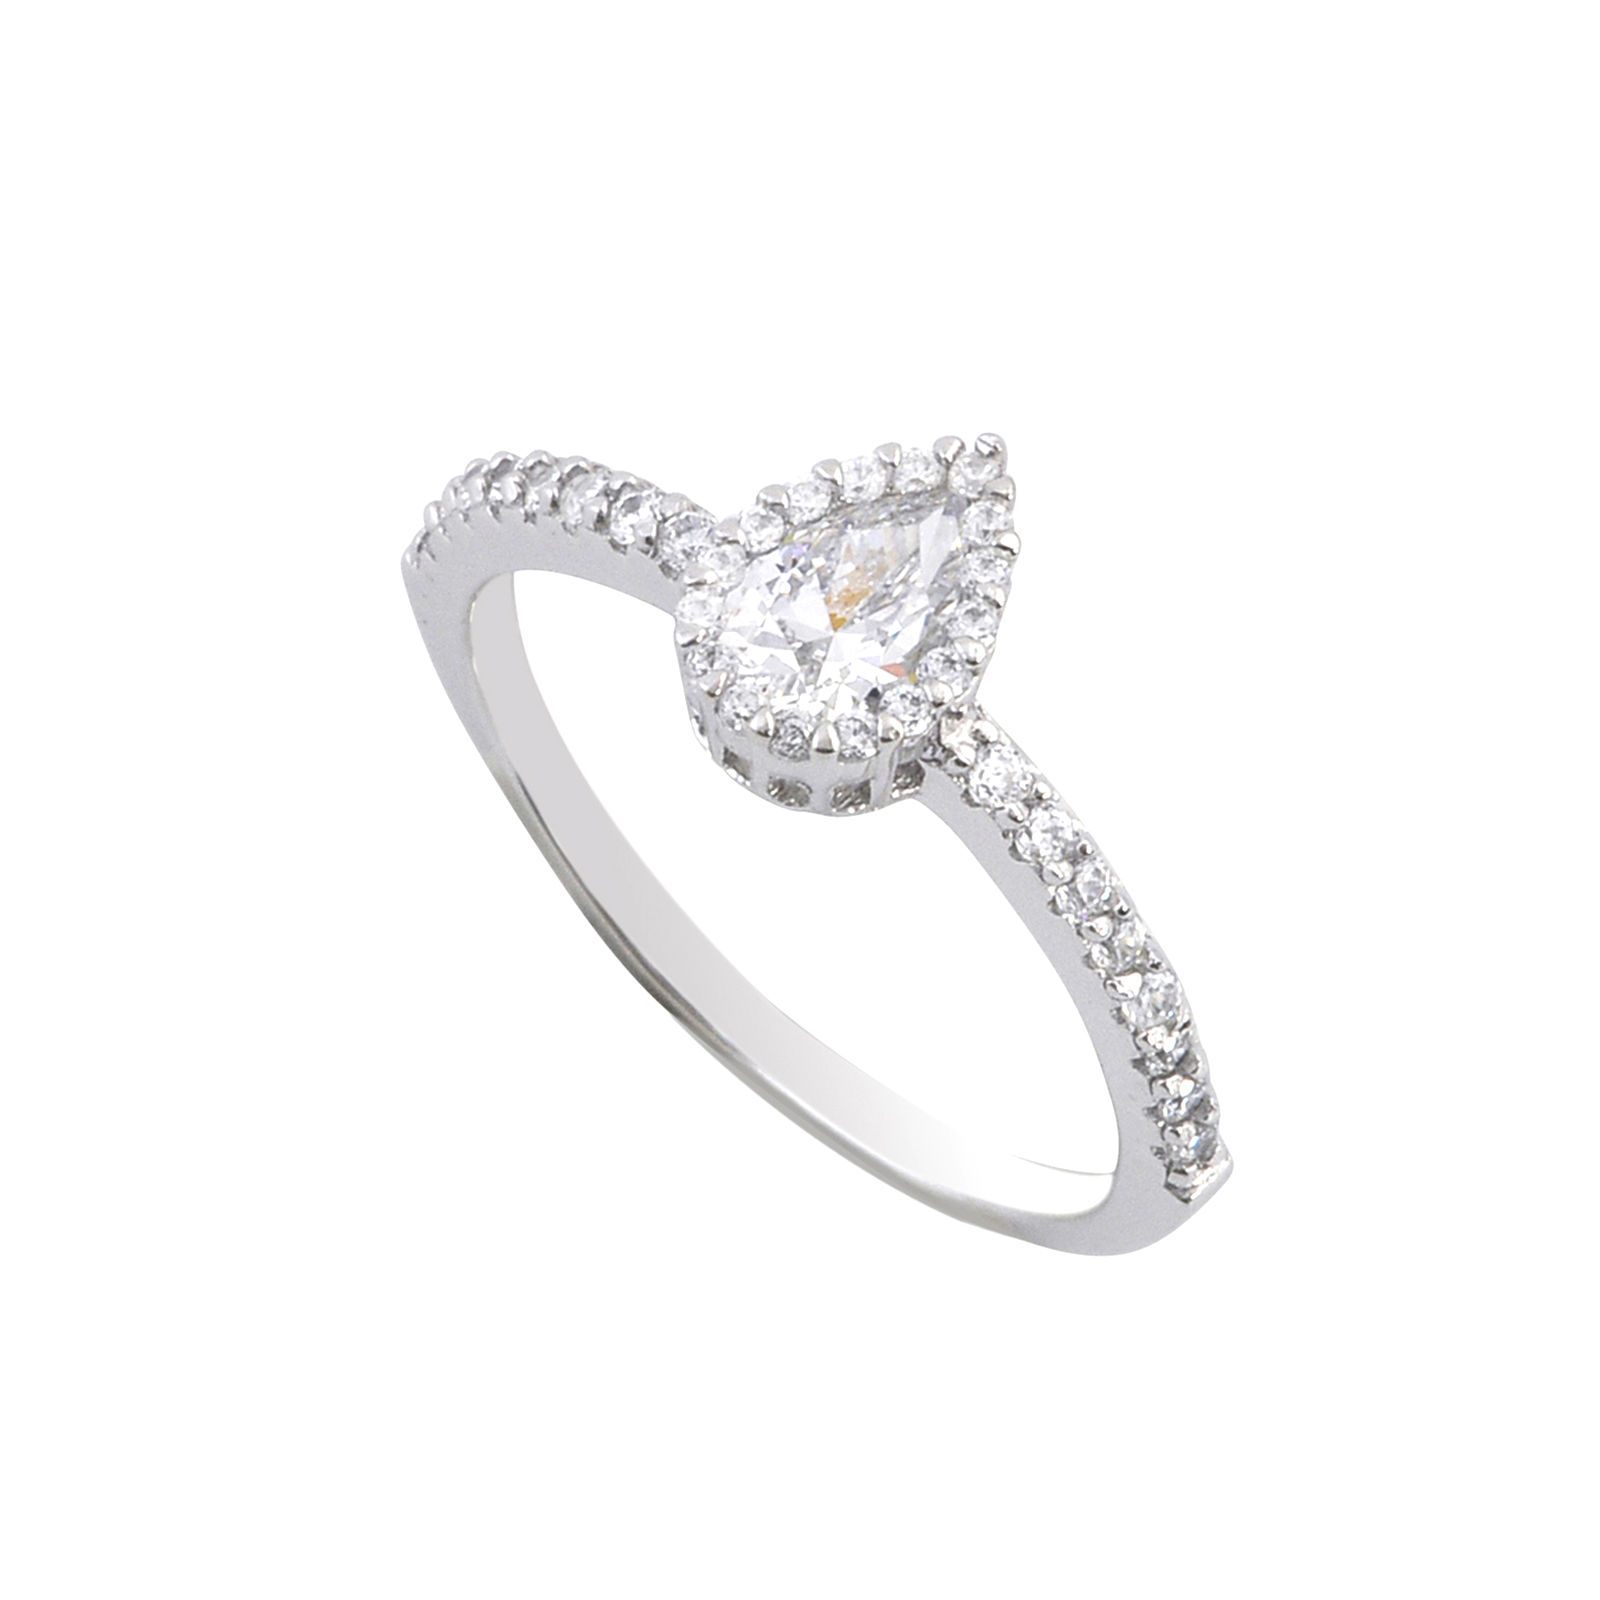 Sterling Silver Pear-Shaped CZ Ring 1ct